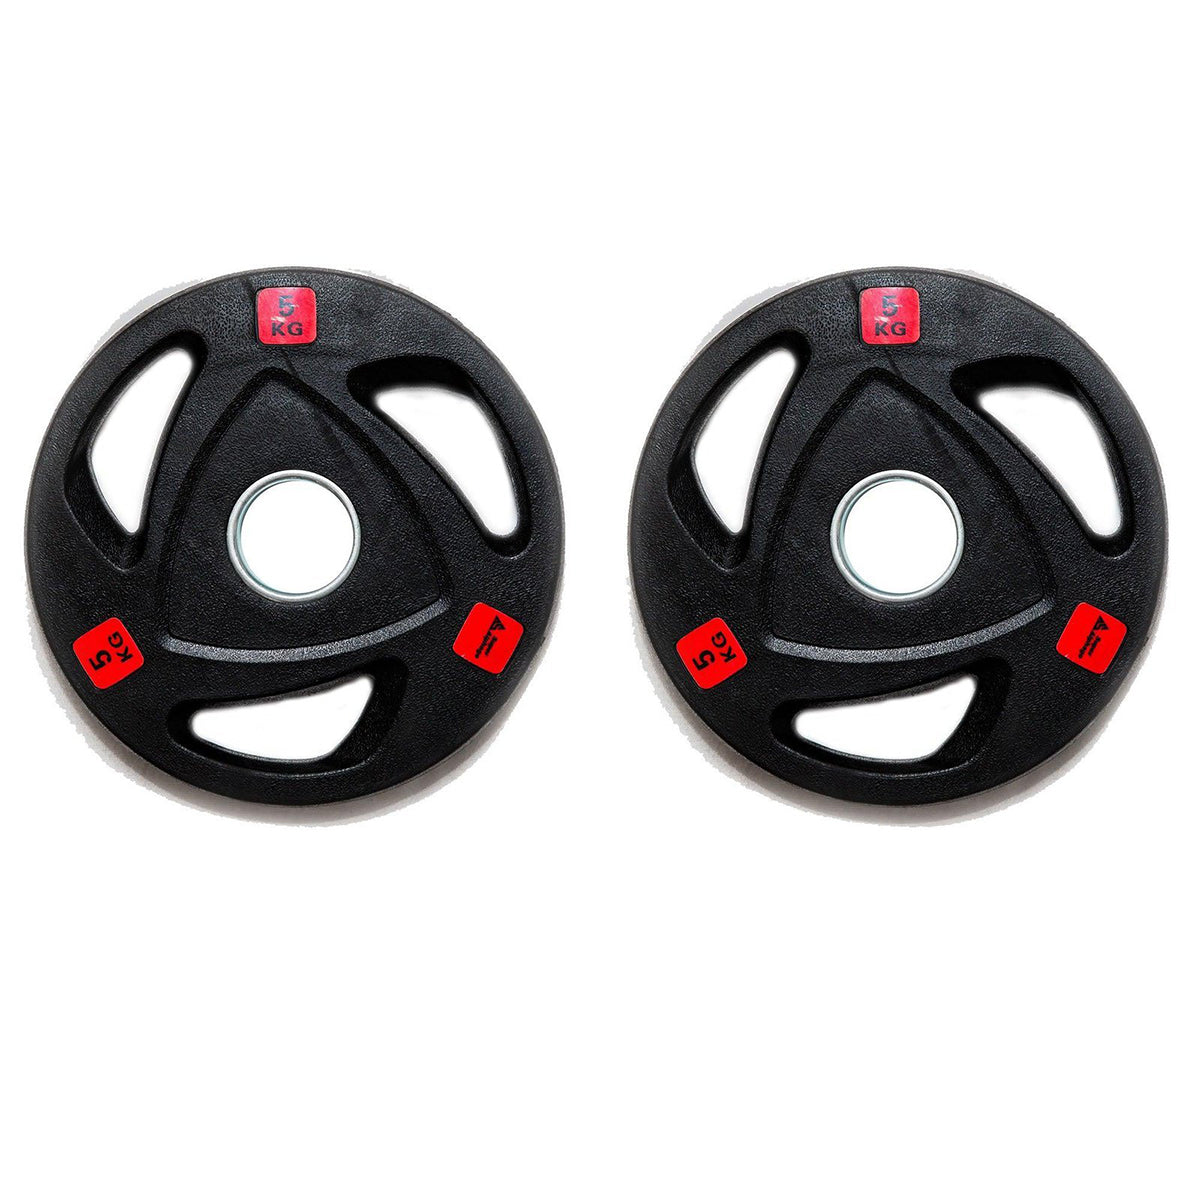 Pair of 5kg Olympic Tri-Grip Rubber Coated Weight Plates